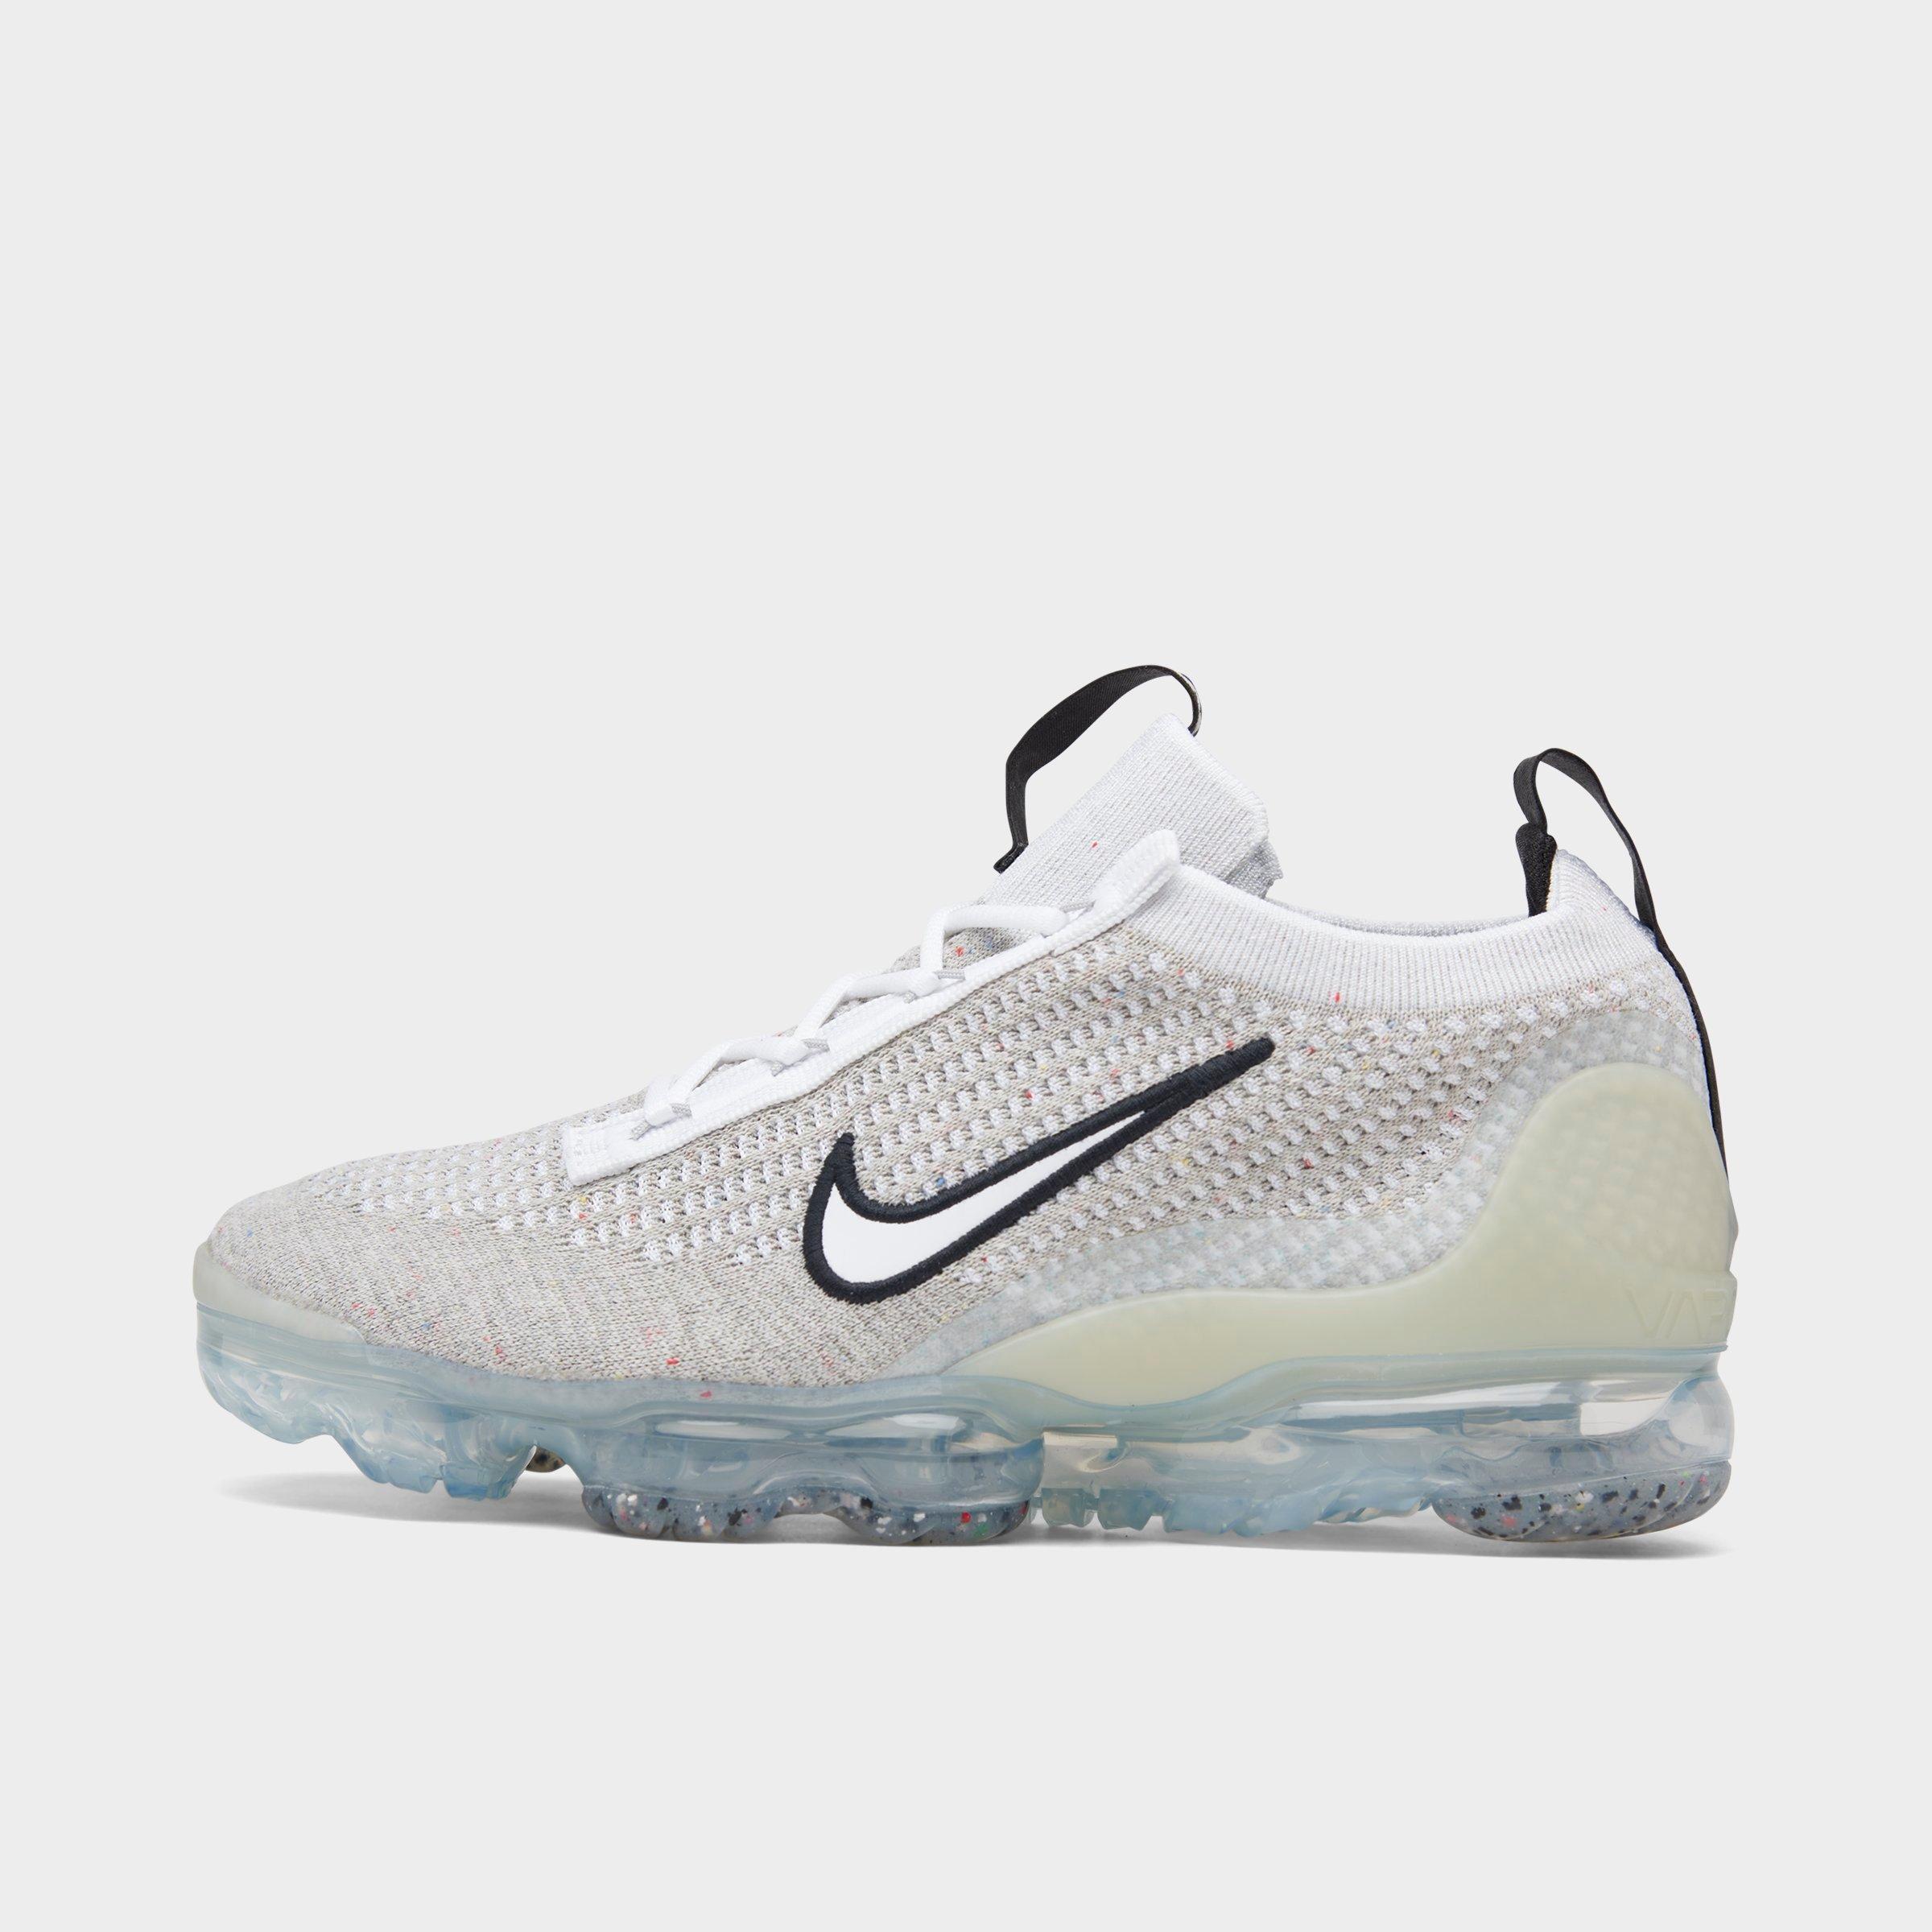 vapormax youth size 7